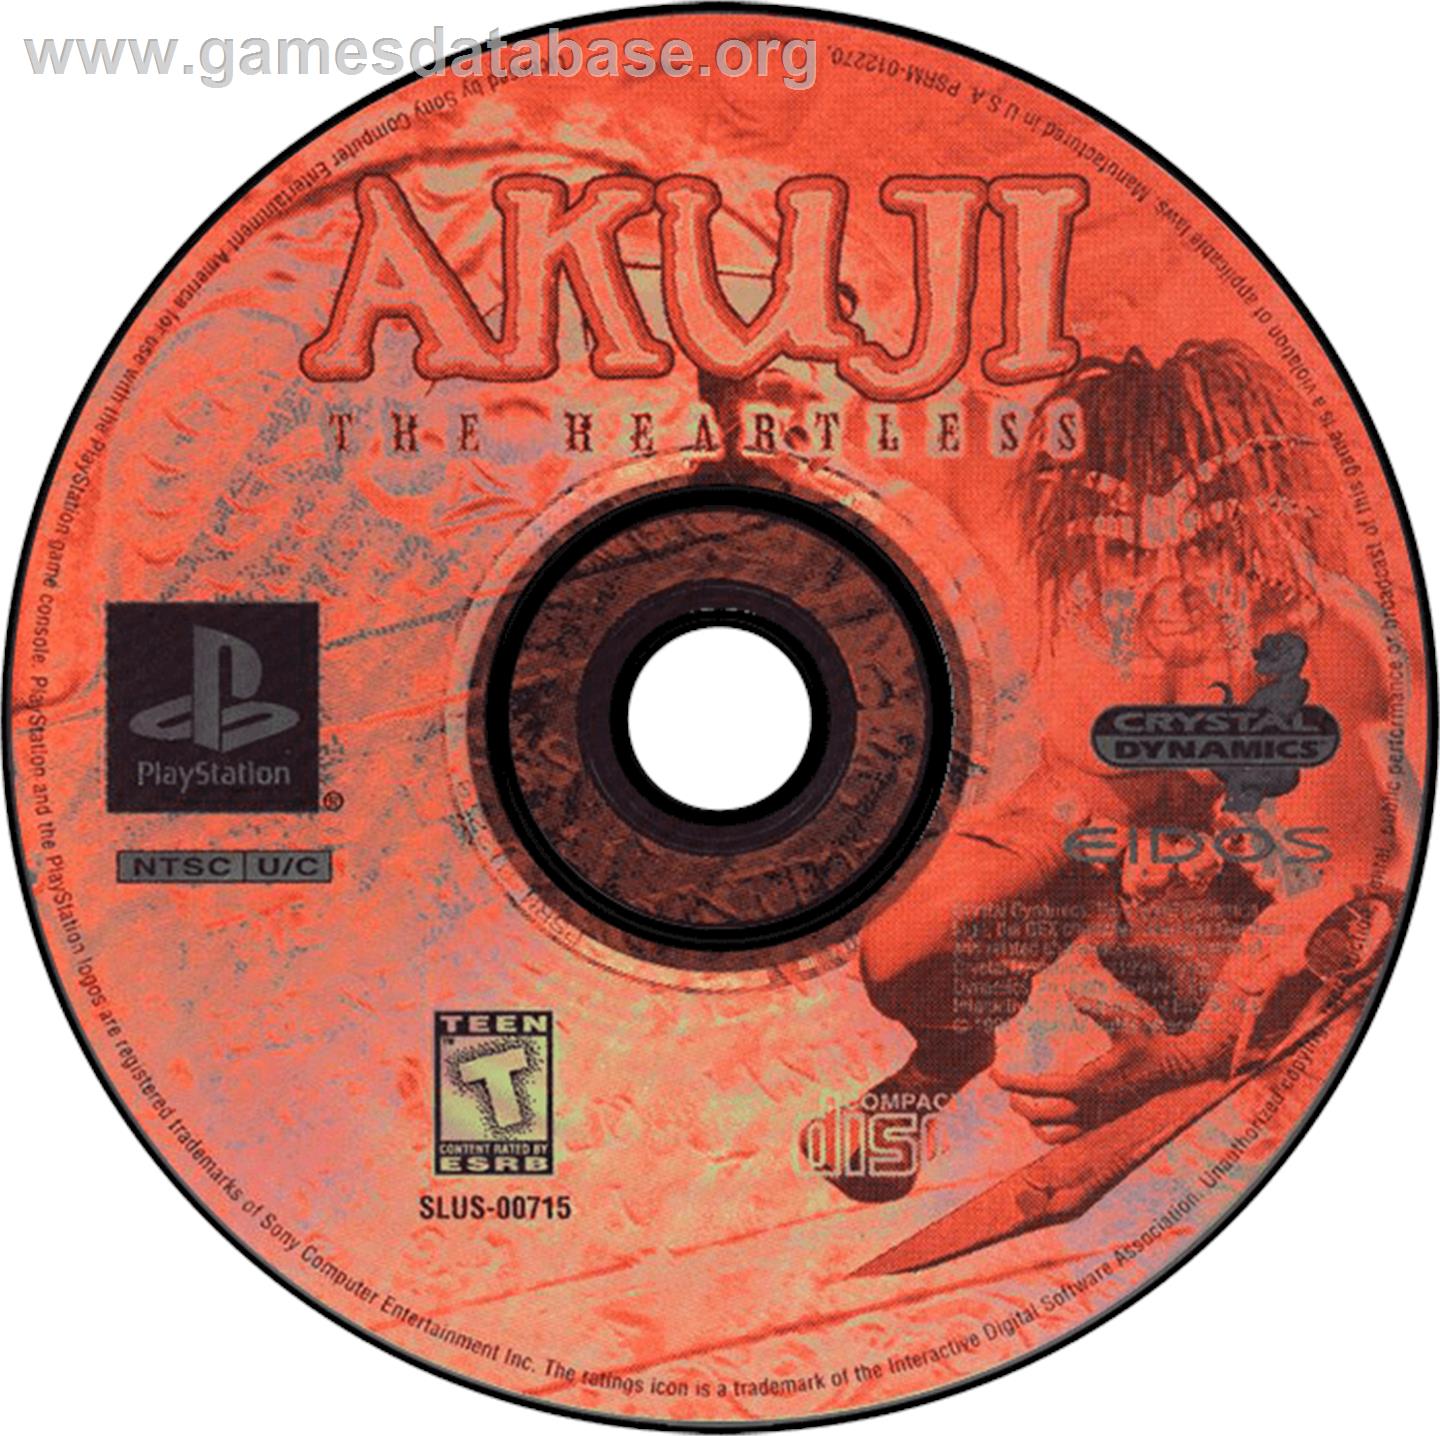 Akuji: The Heartless - Sony Playstation - Artwork - Disc